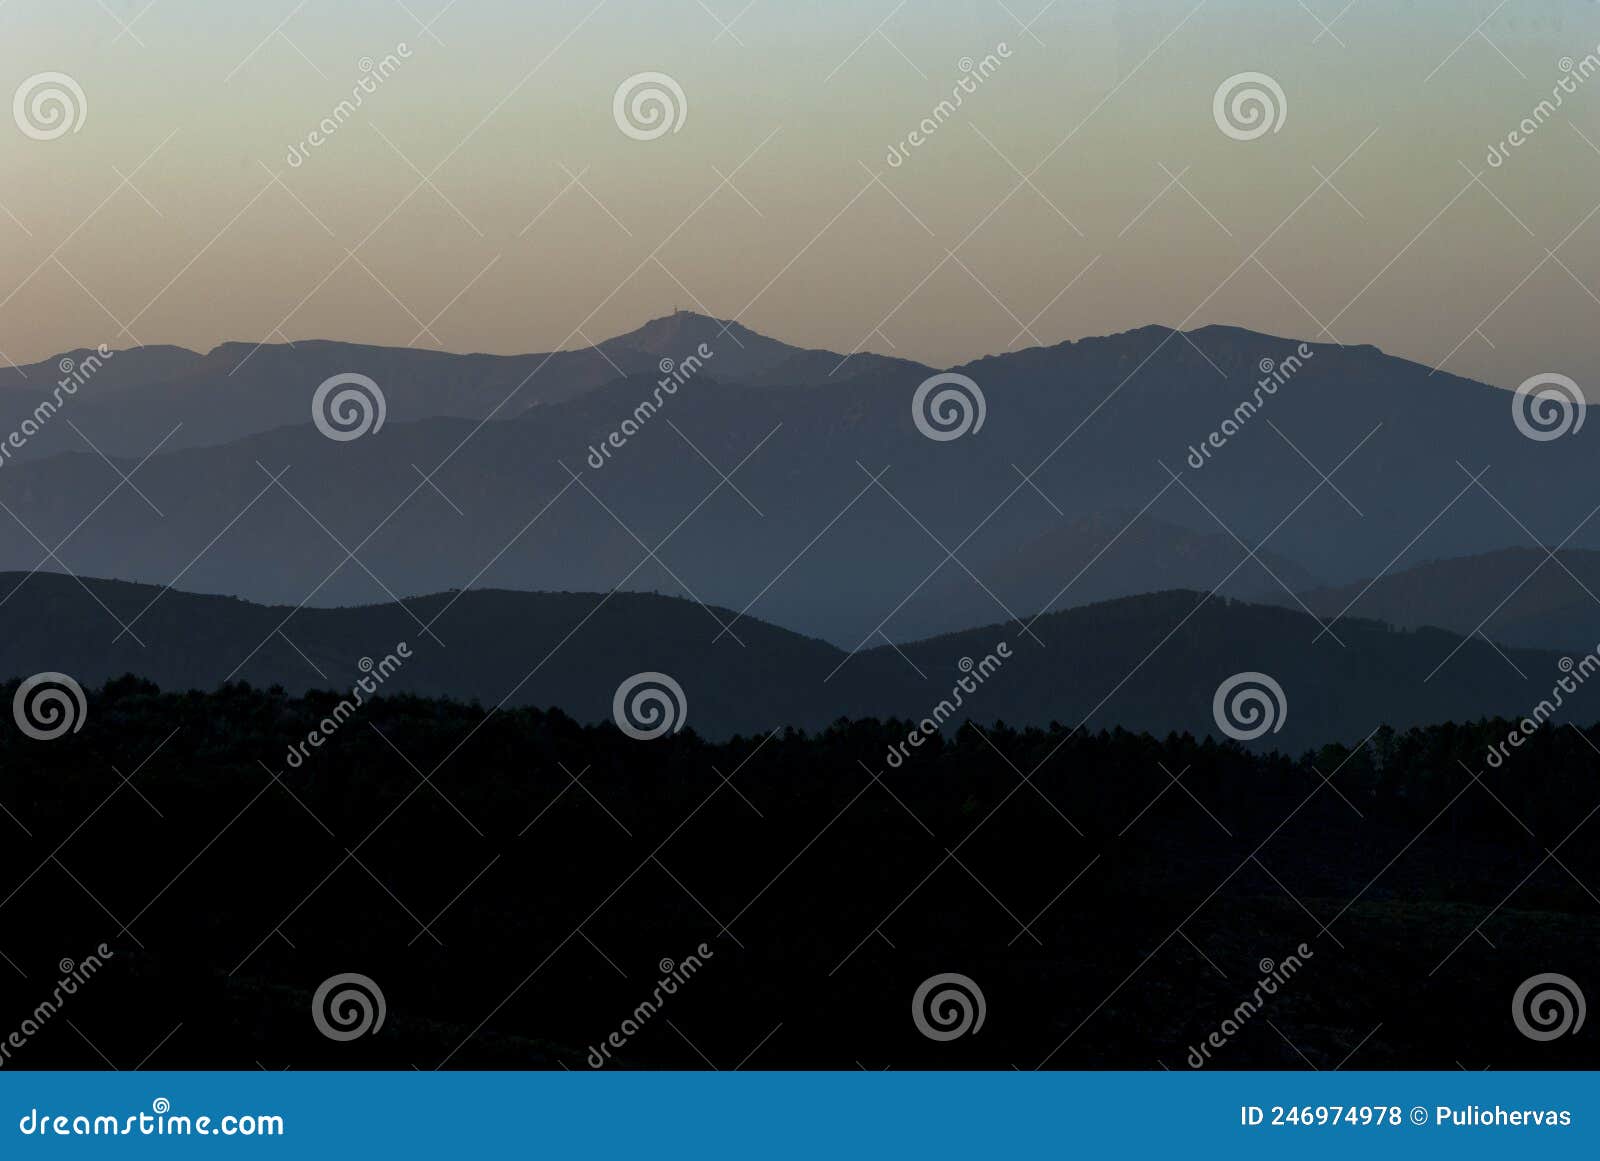 silhouette of mountains of the peÃÂ±a de francia, sierra de las batuecas, salamanca